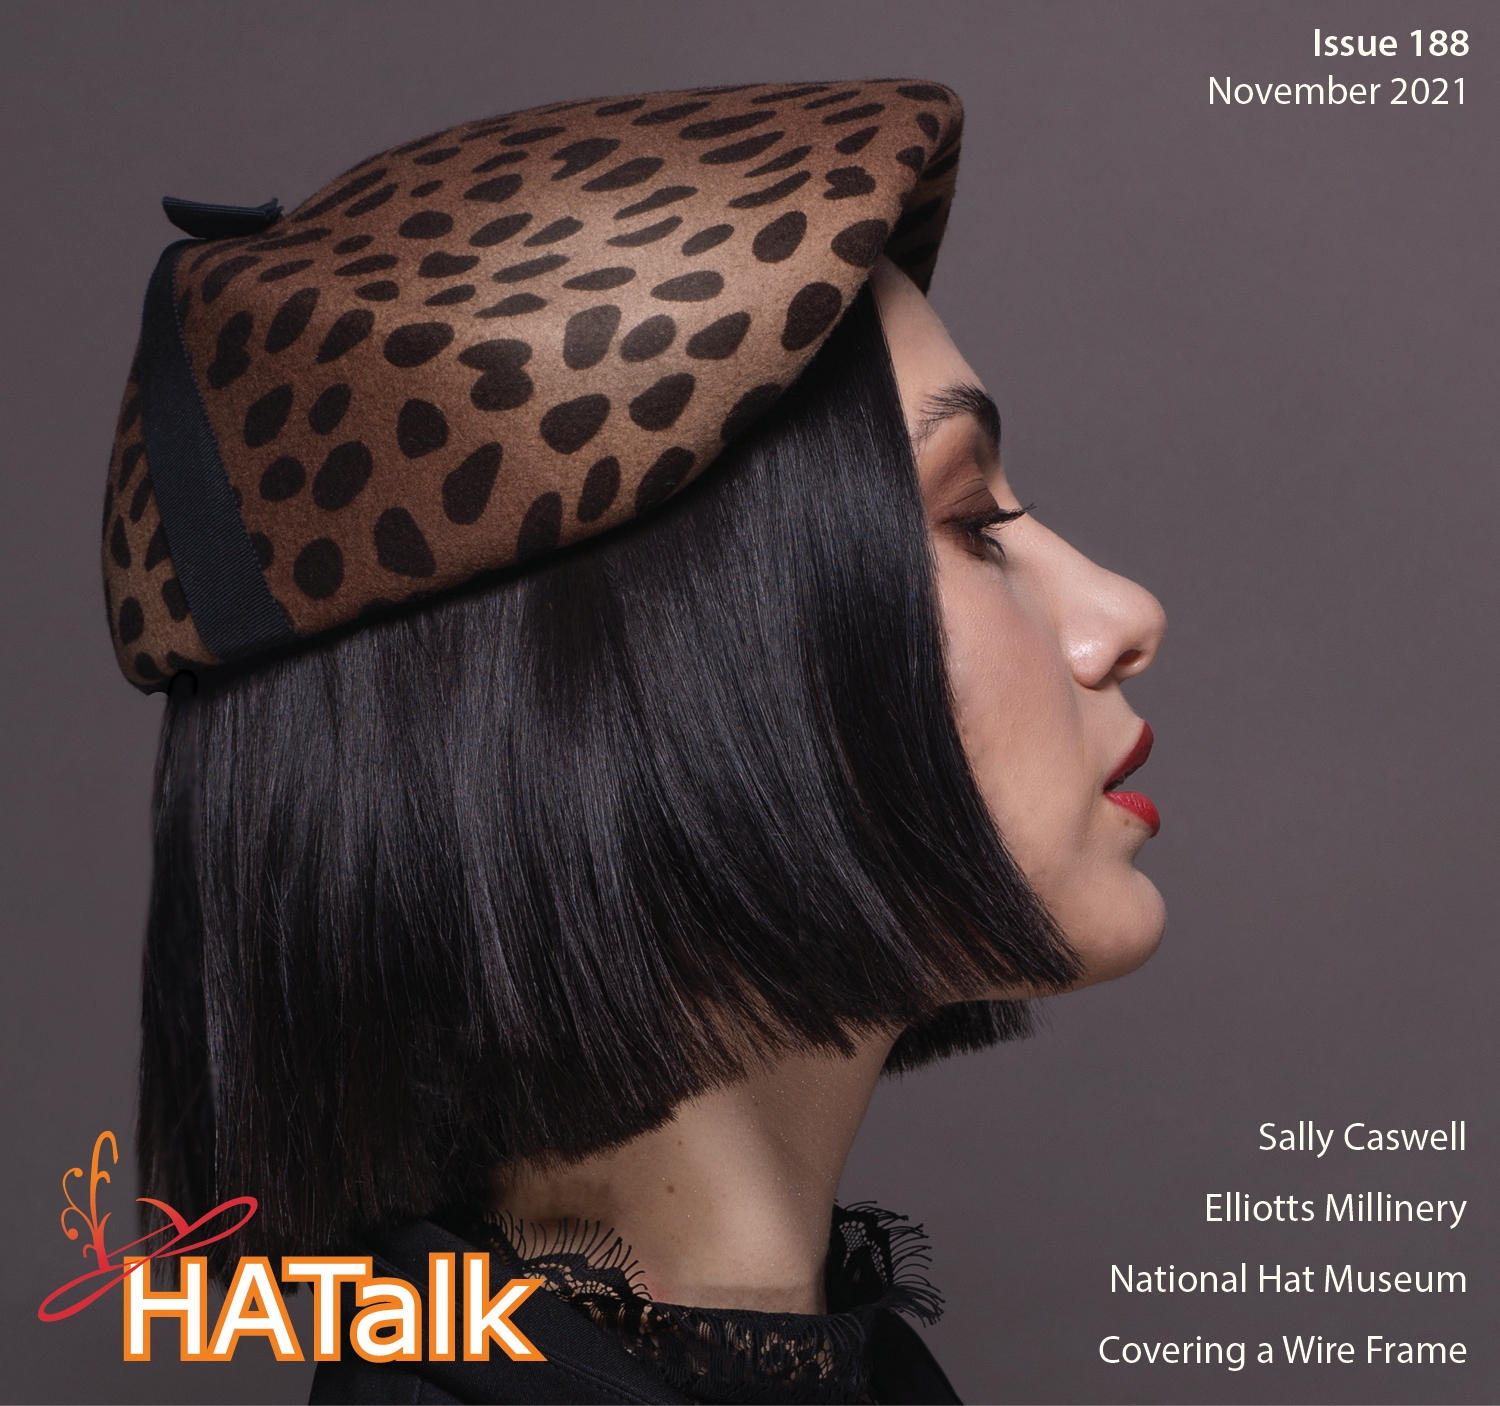 HATalk Issue 188. Cover hat by Elliotts Millinery. Image by The Portrait Kitchen.